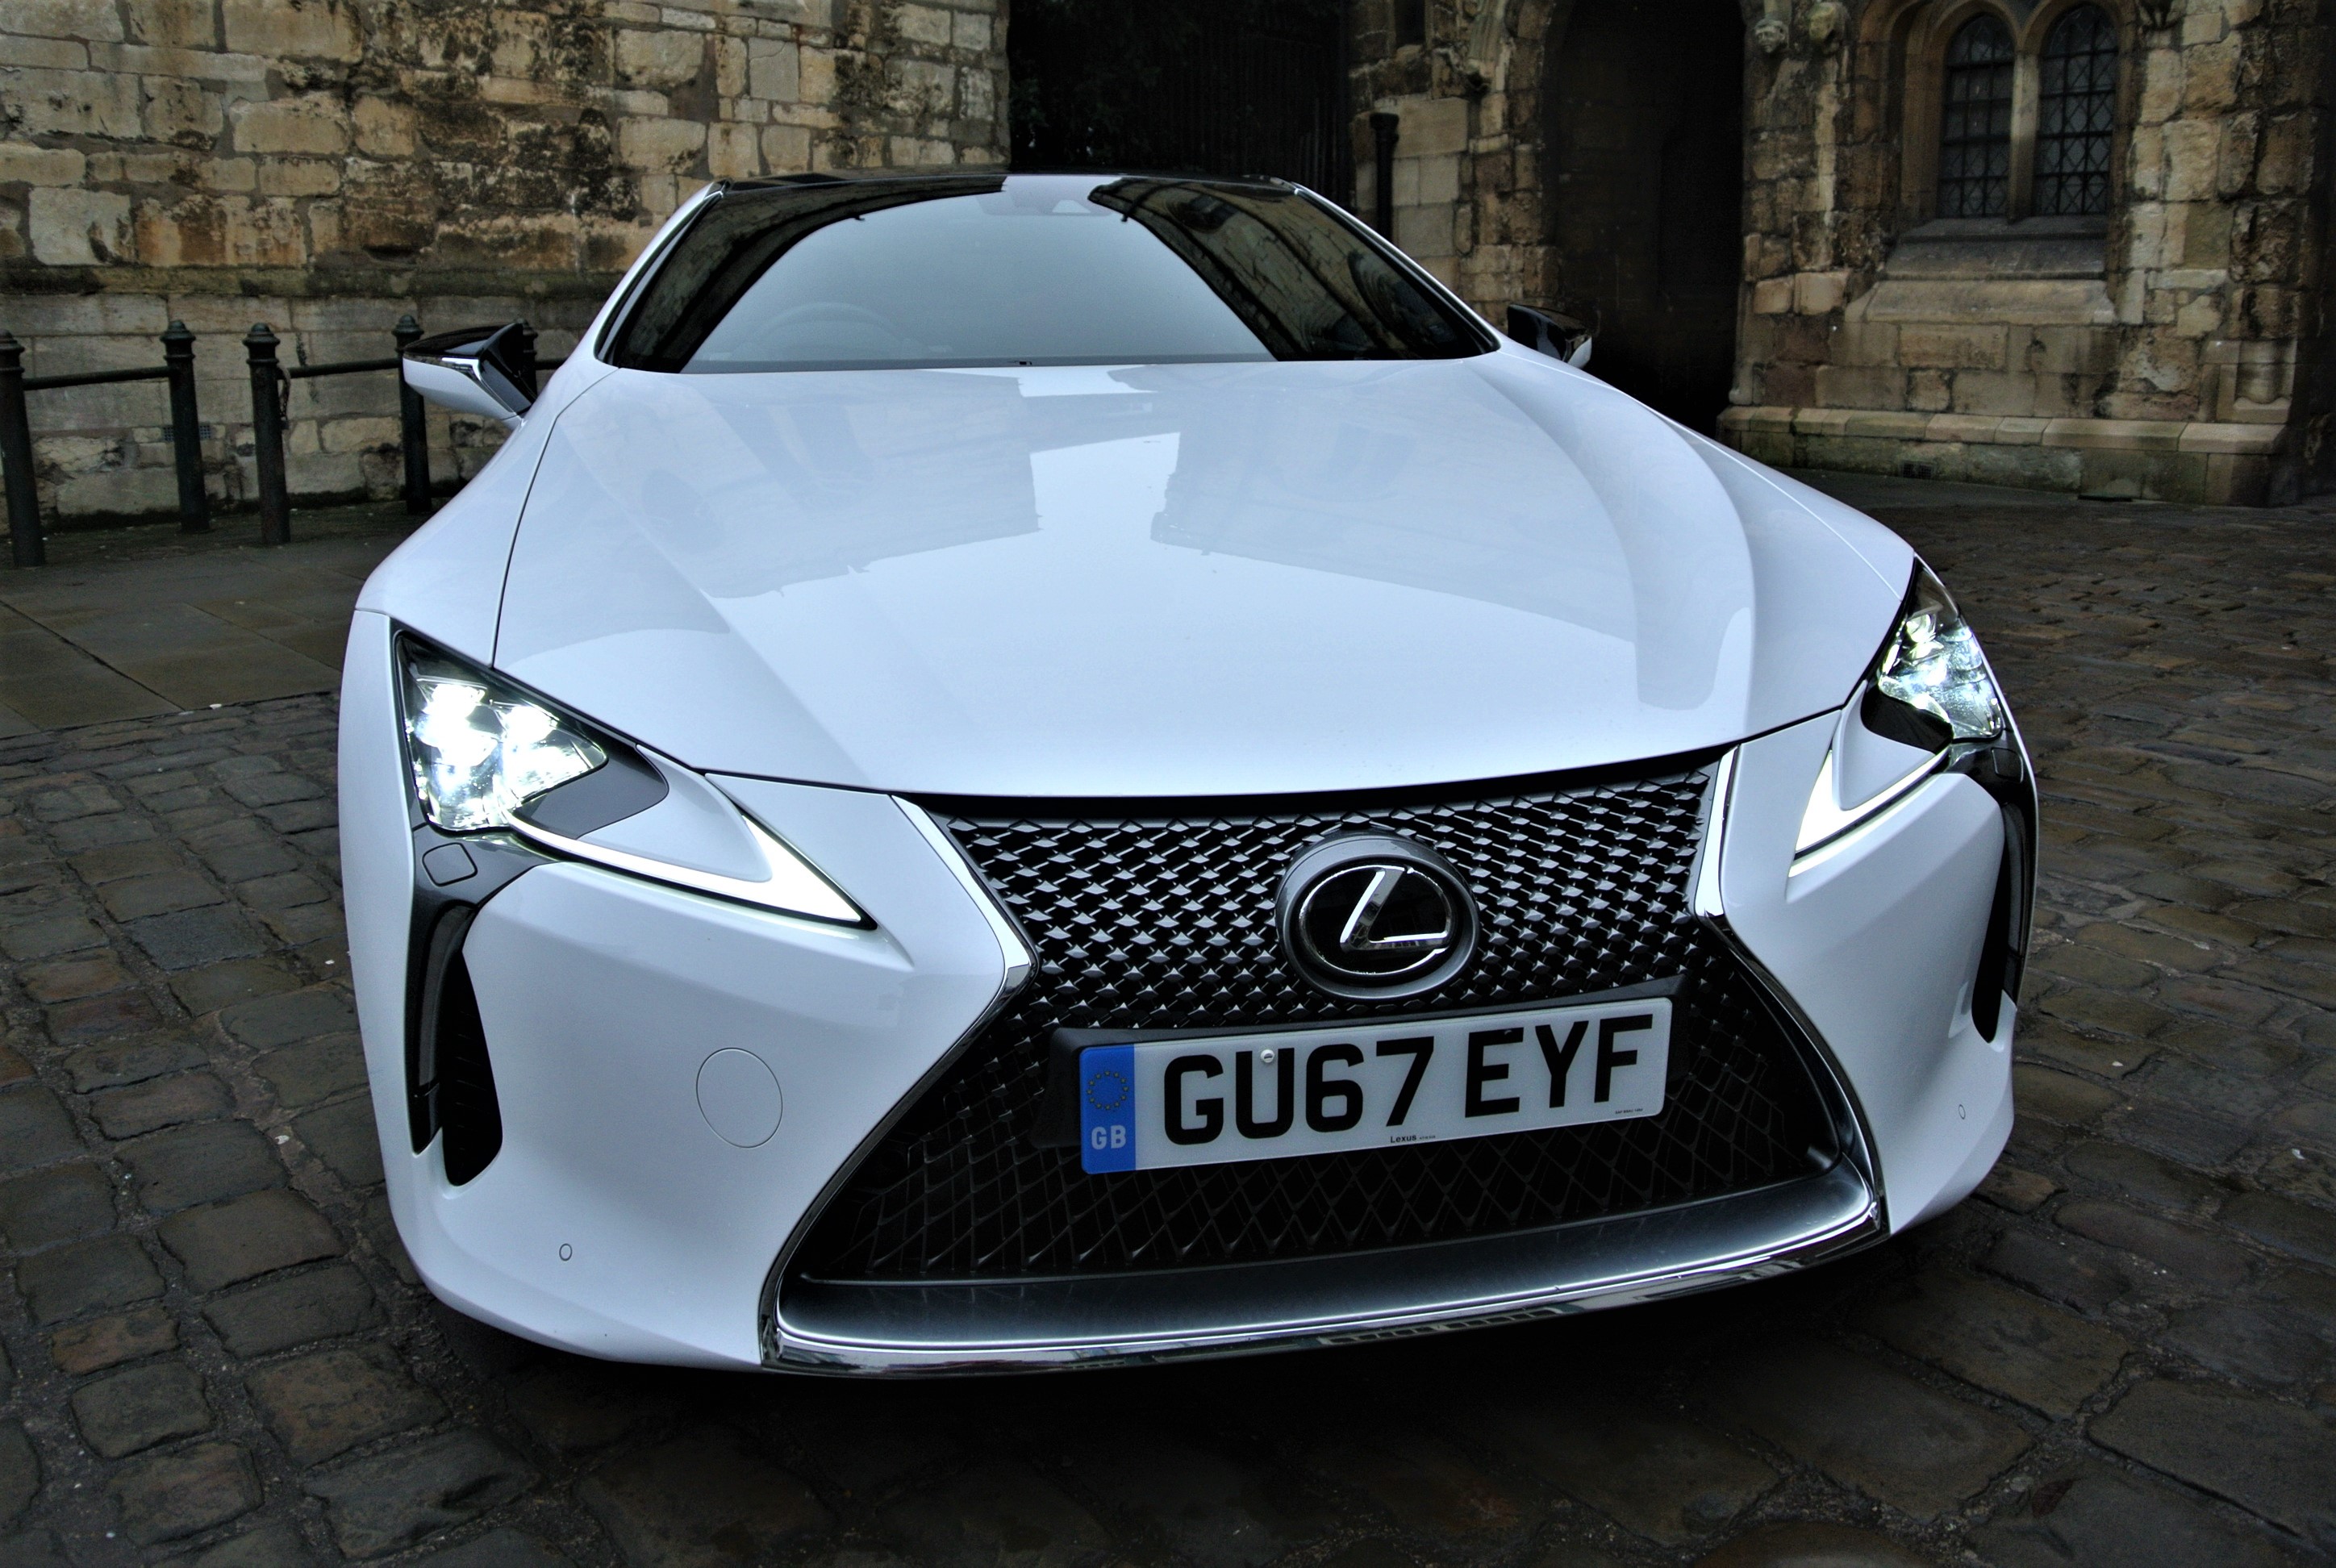 While Lexus has always had ‘head-appeal’, the new LC500 grabs the soul